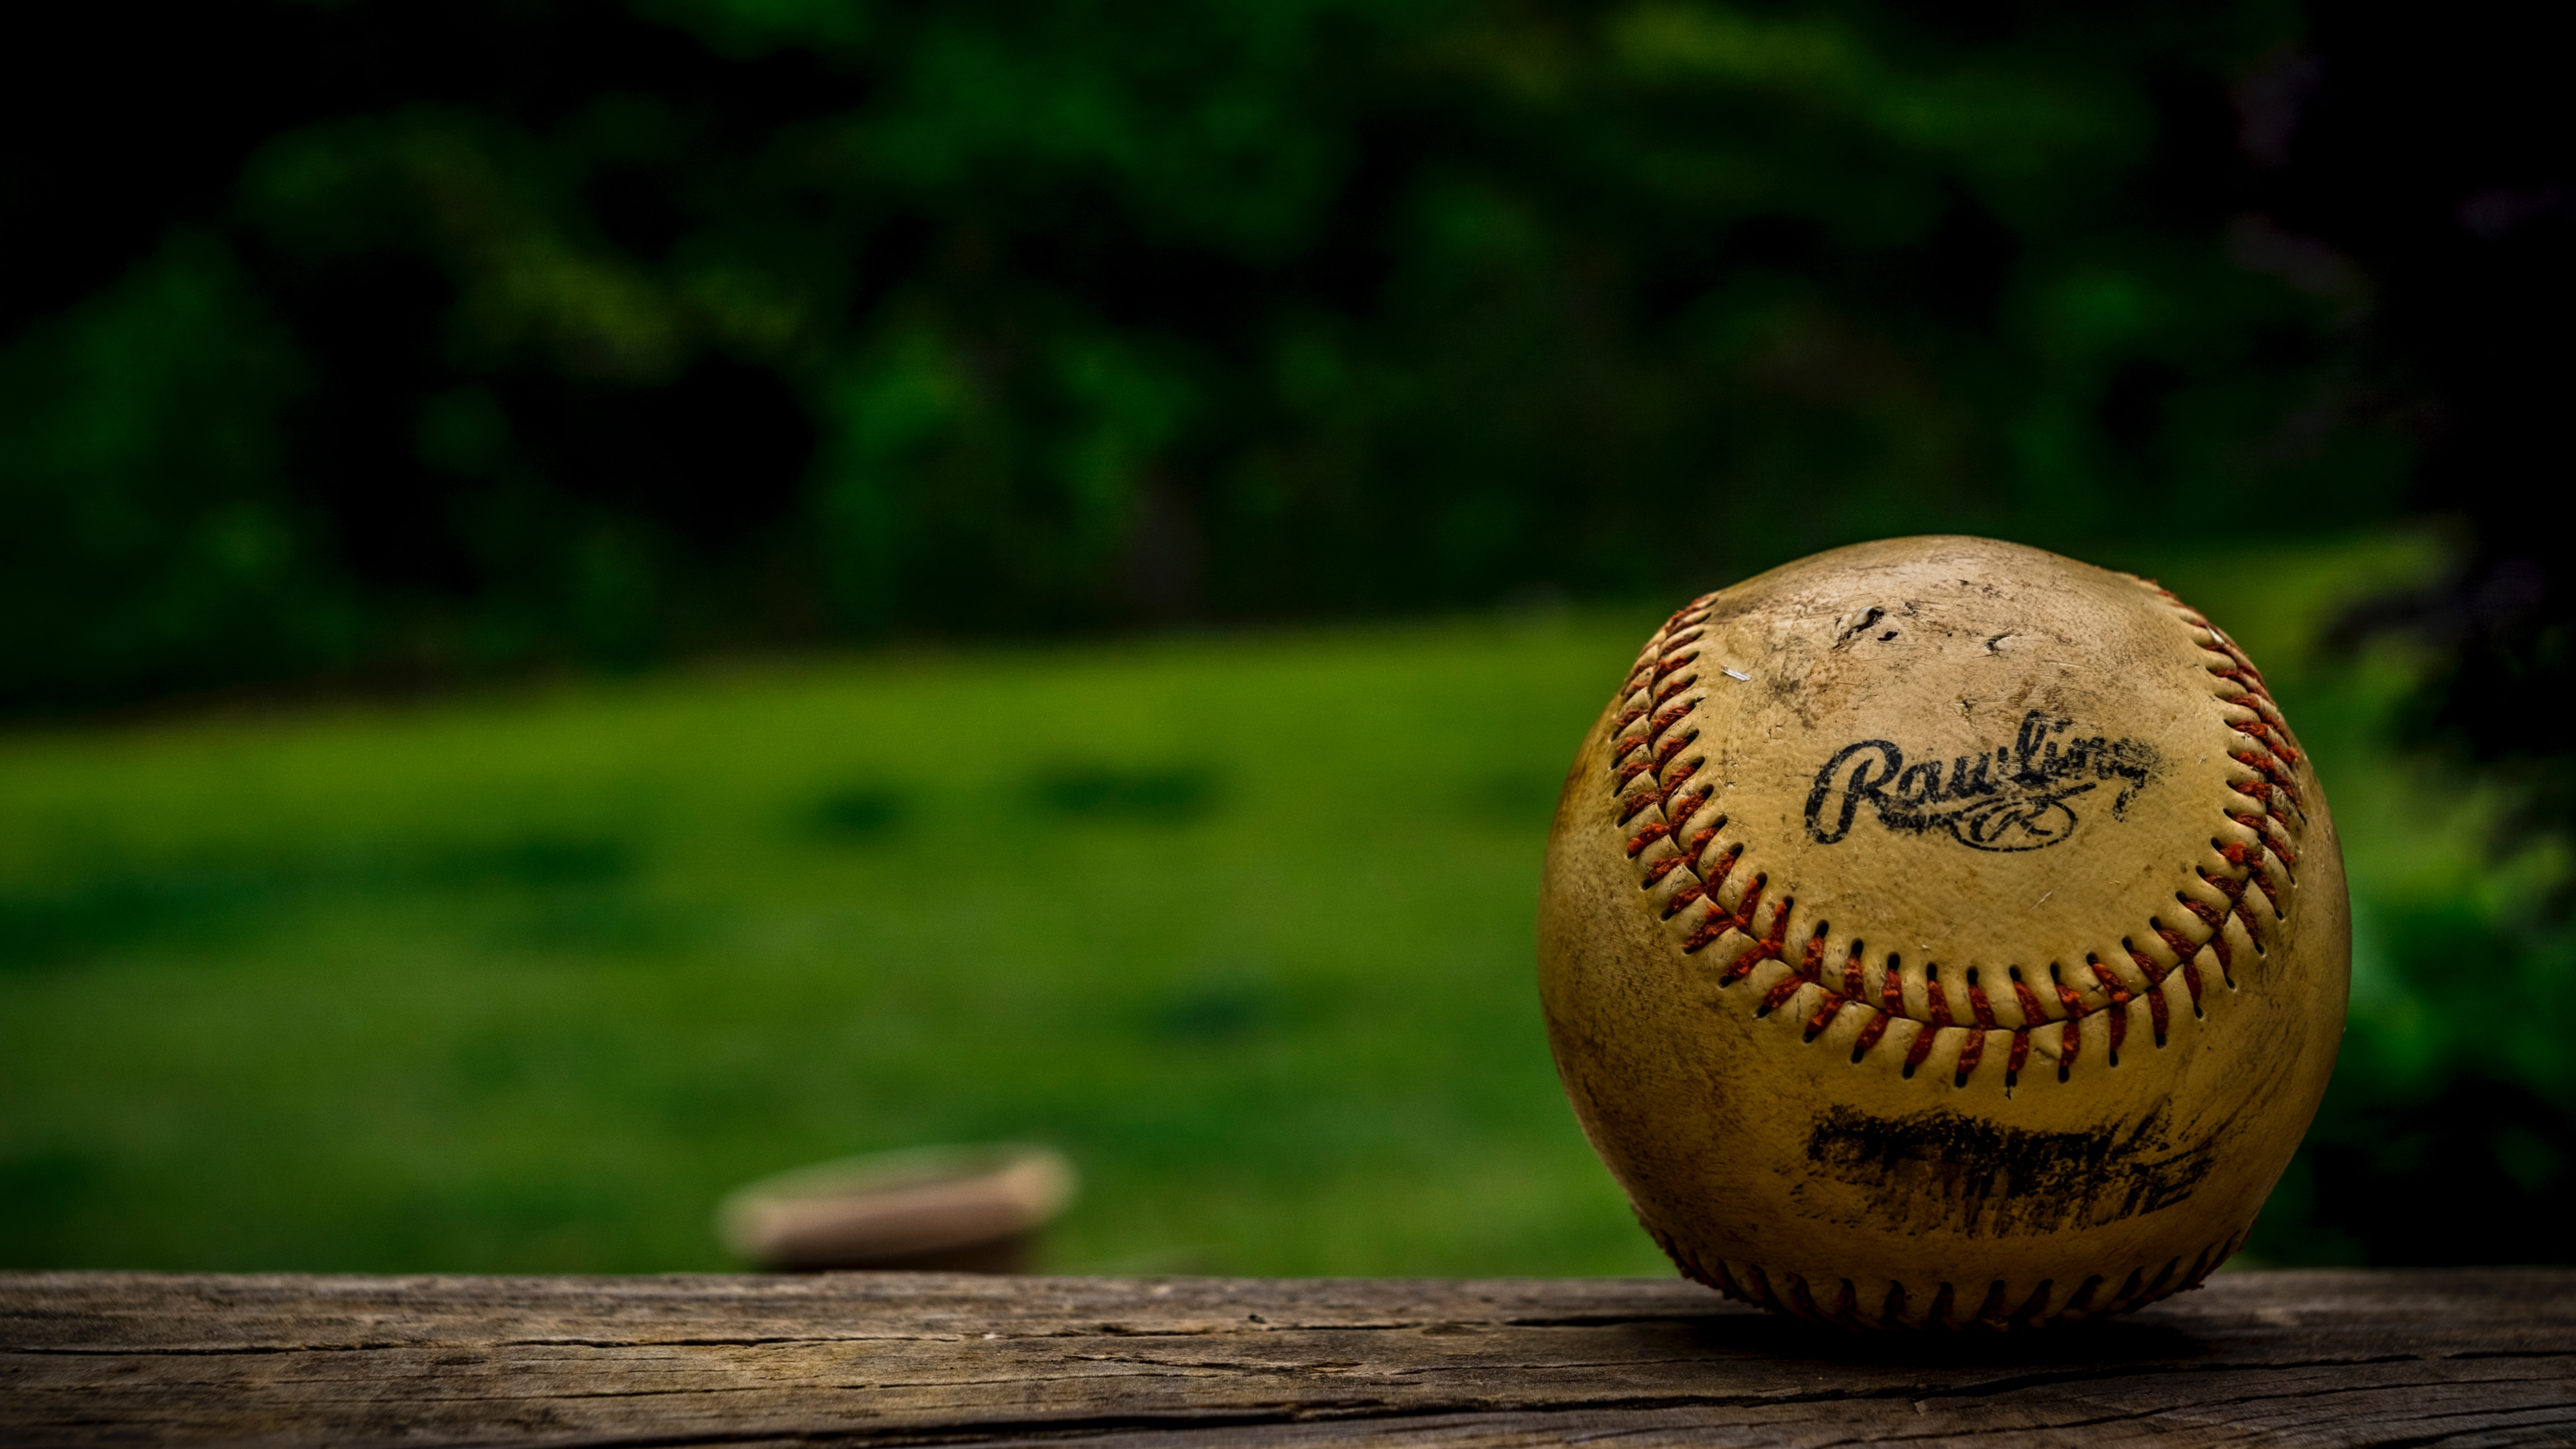 An old worn out Rawlings baseball